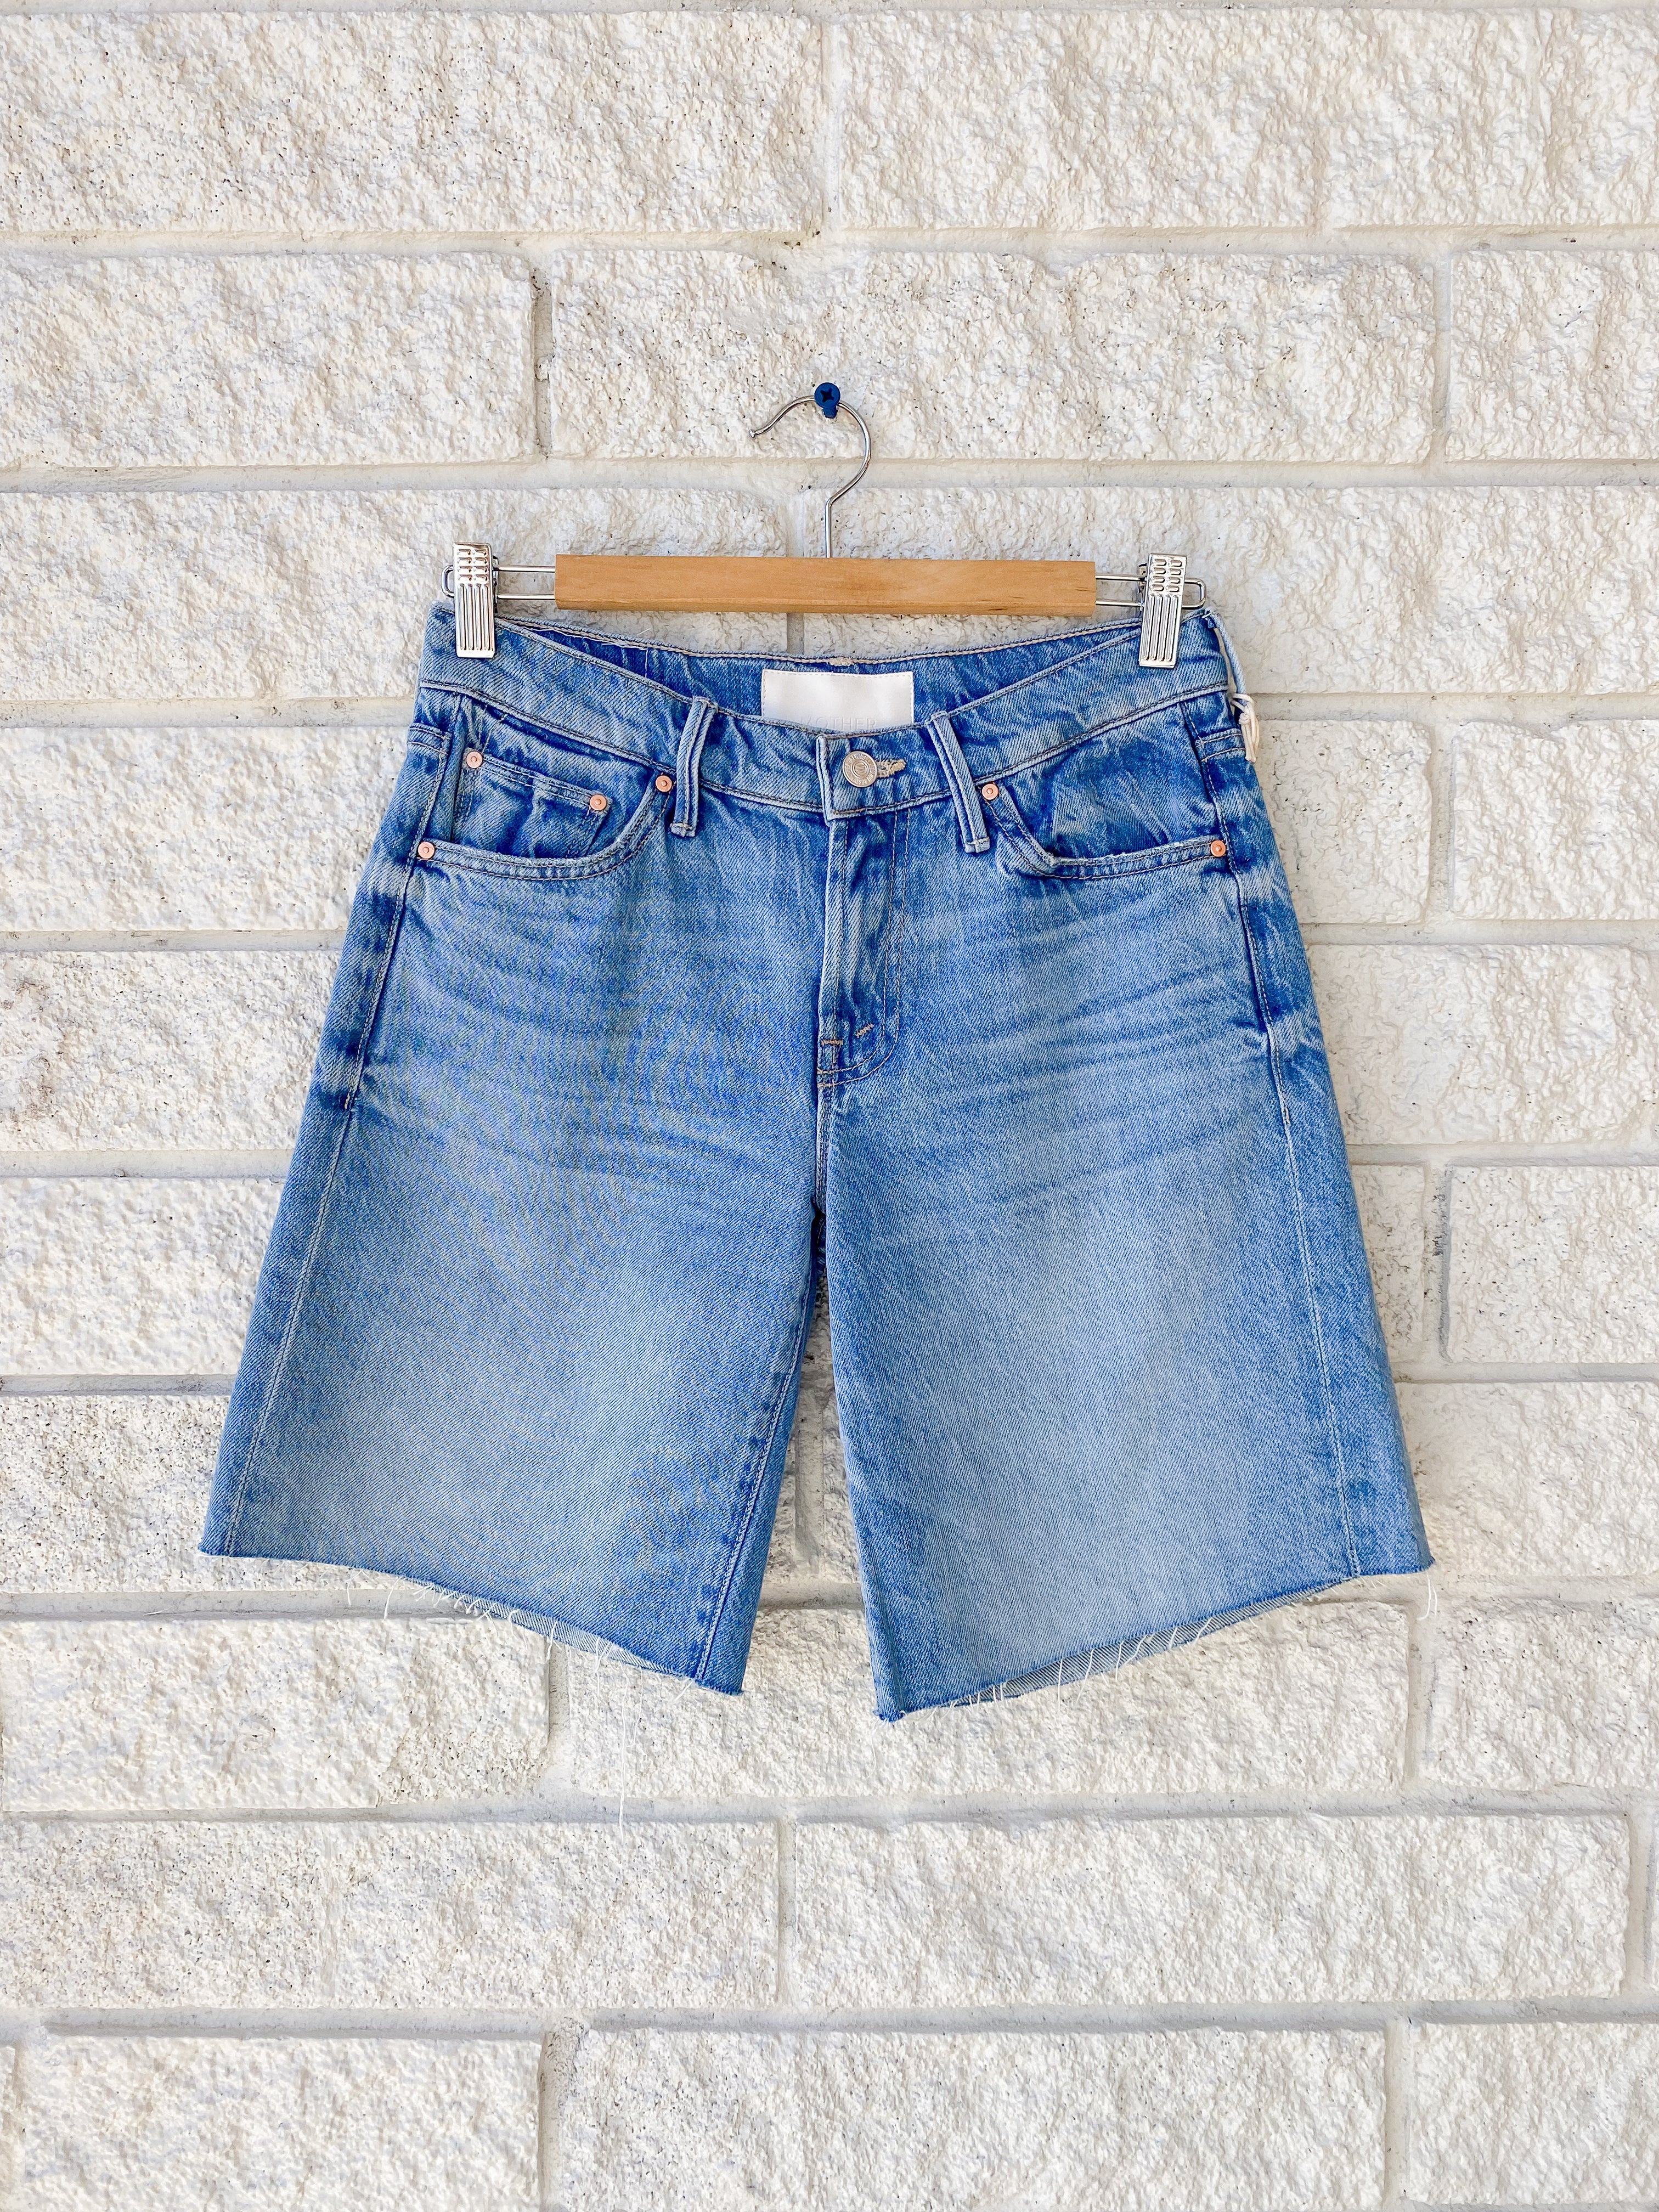 Down Low Undercover Short Fray